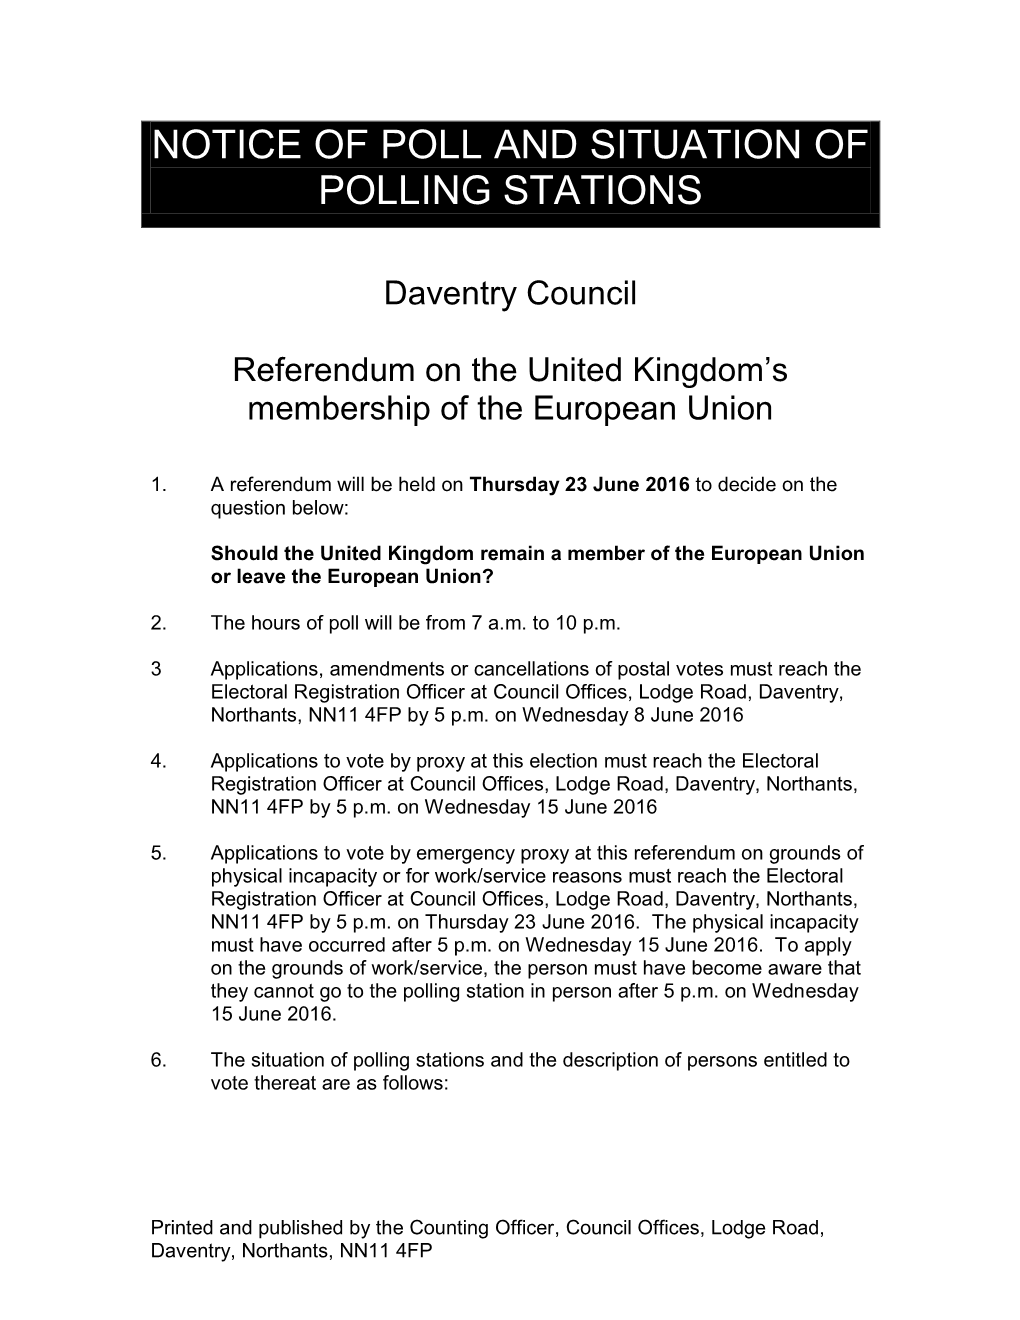 Notice of Poll and Situation of Polling Stations Referendum